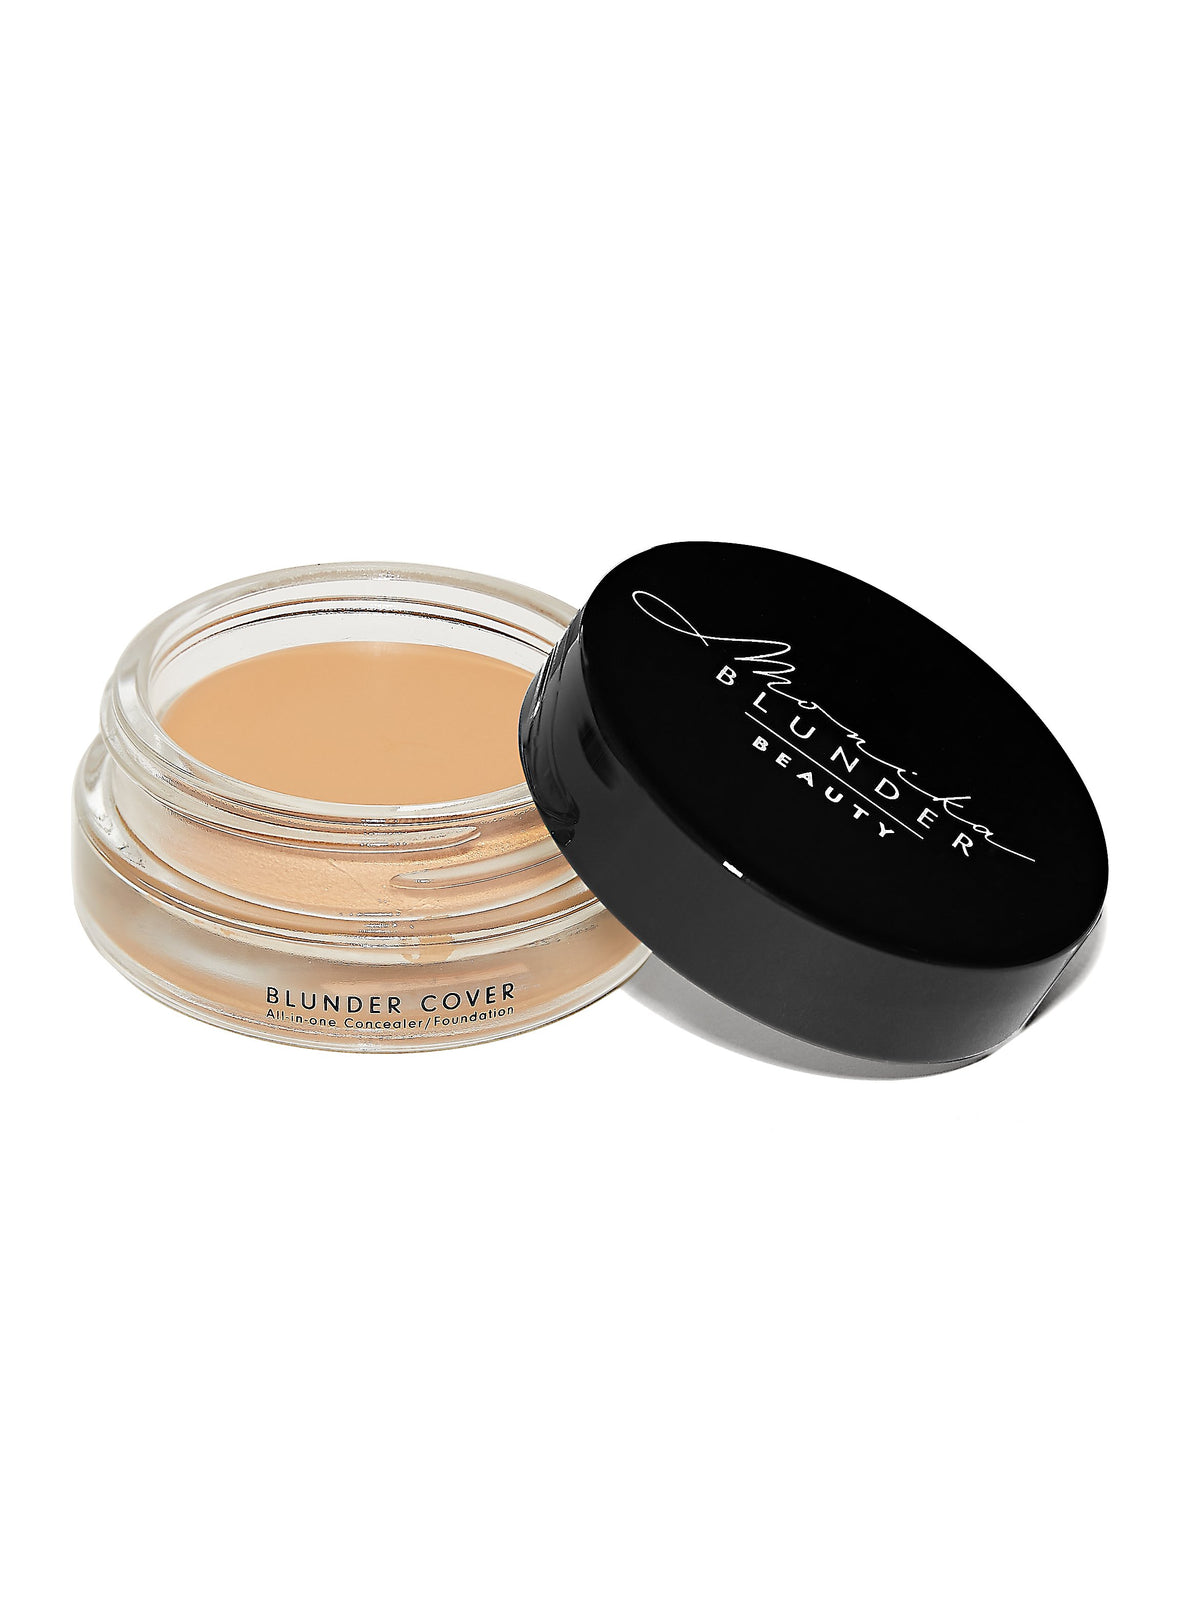 4 VIER Blunder Cover All-in-One Concealer/ Foundation